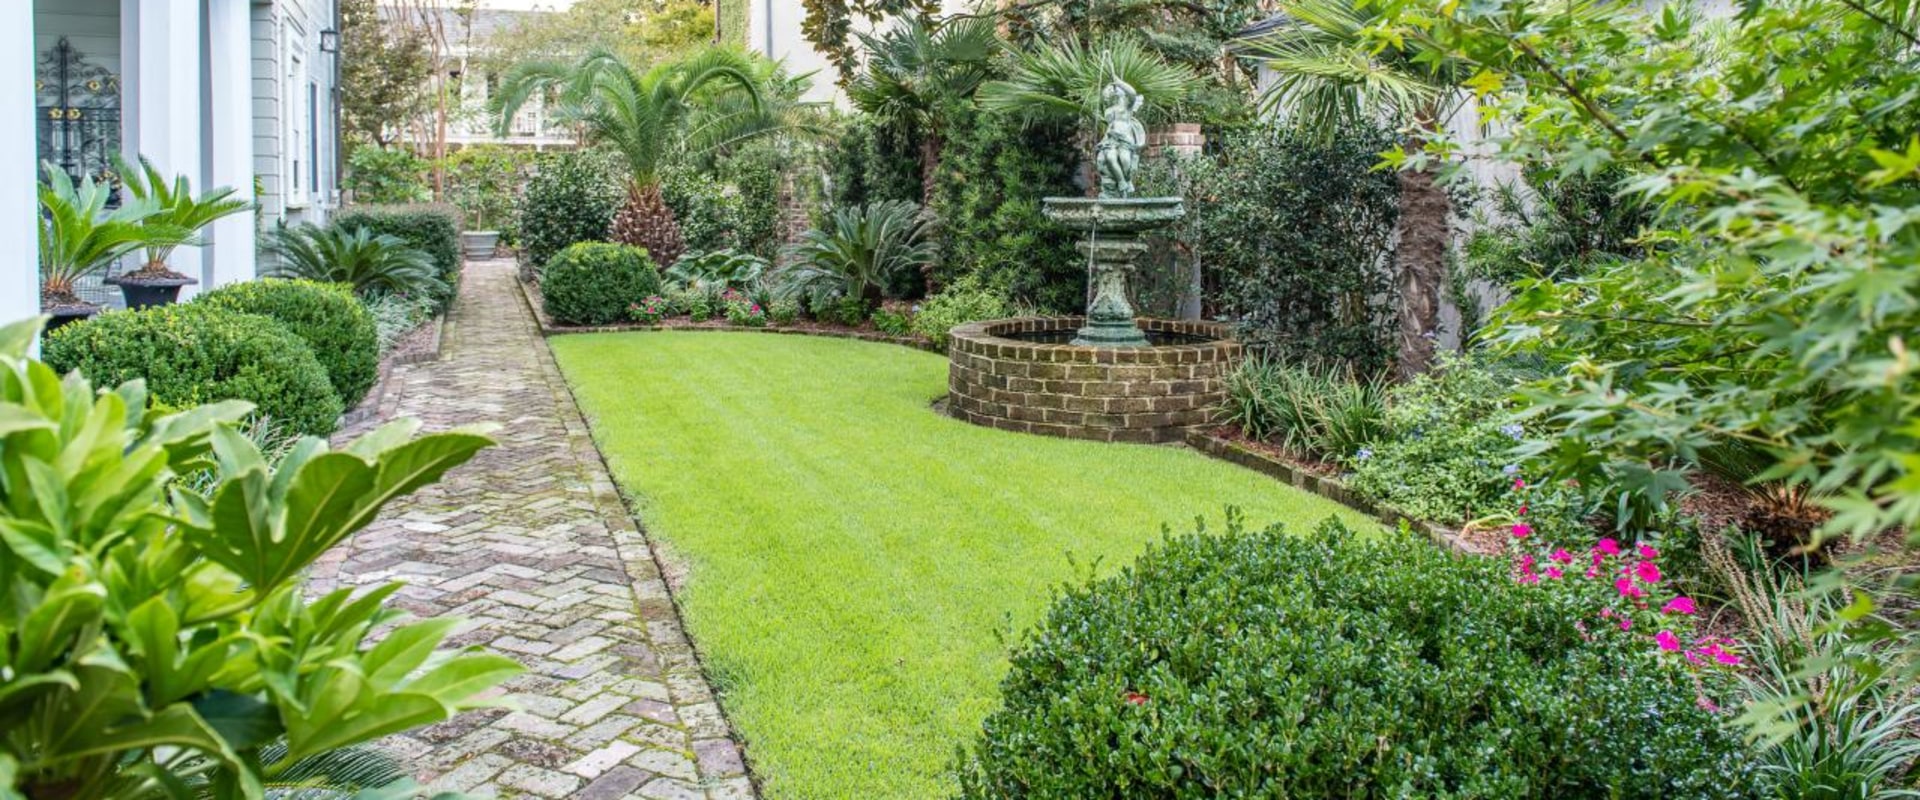 How to Ensure Your Landscaping Project is Completed on Time and on Budget